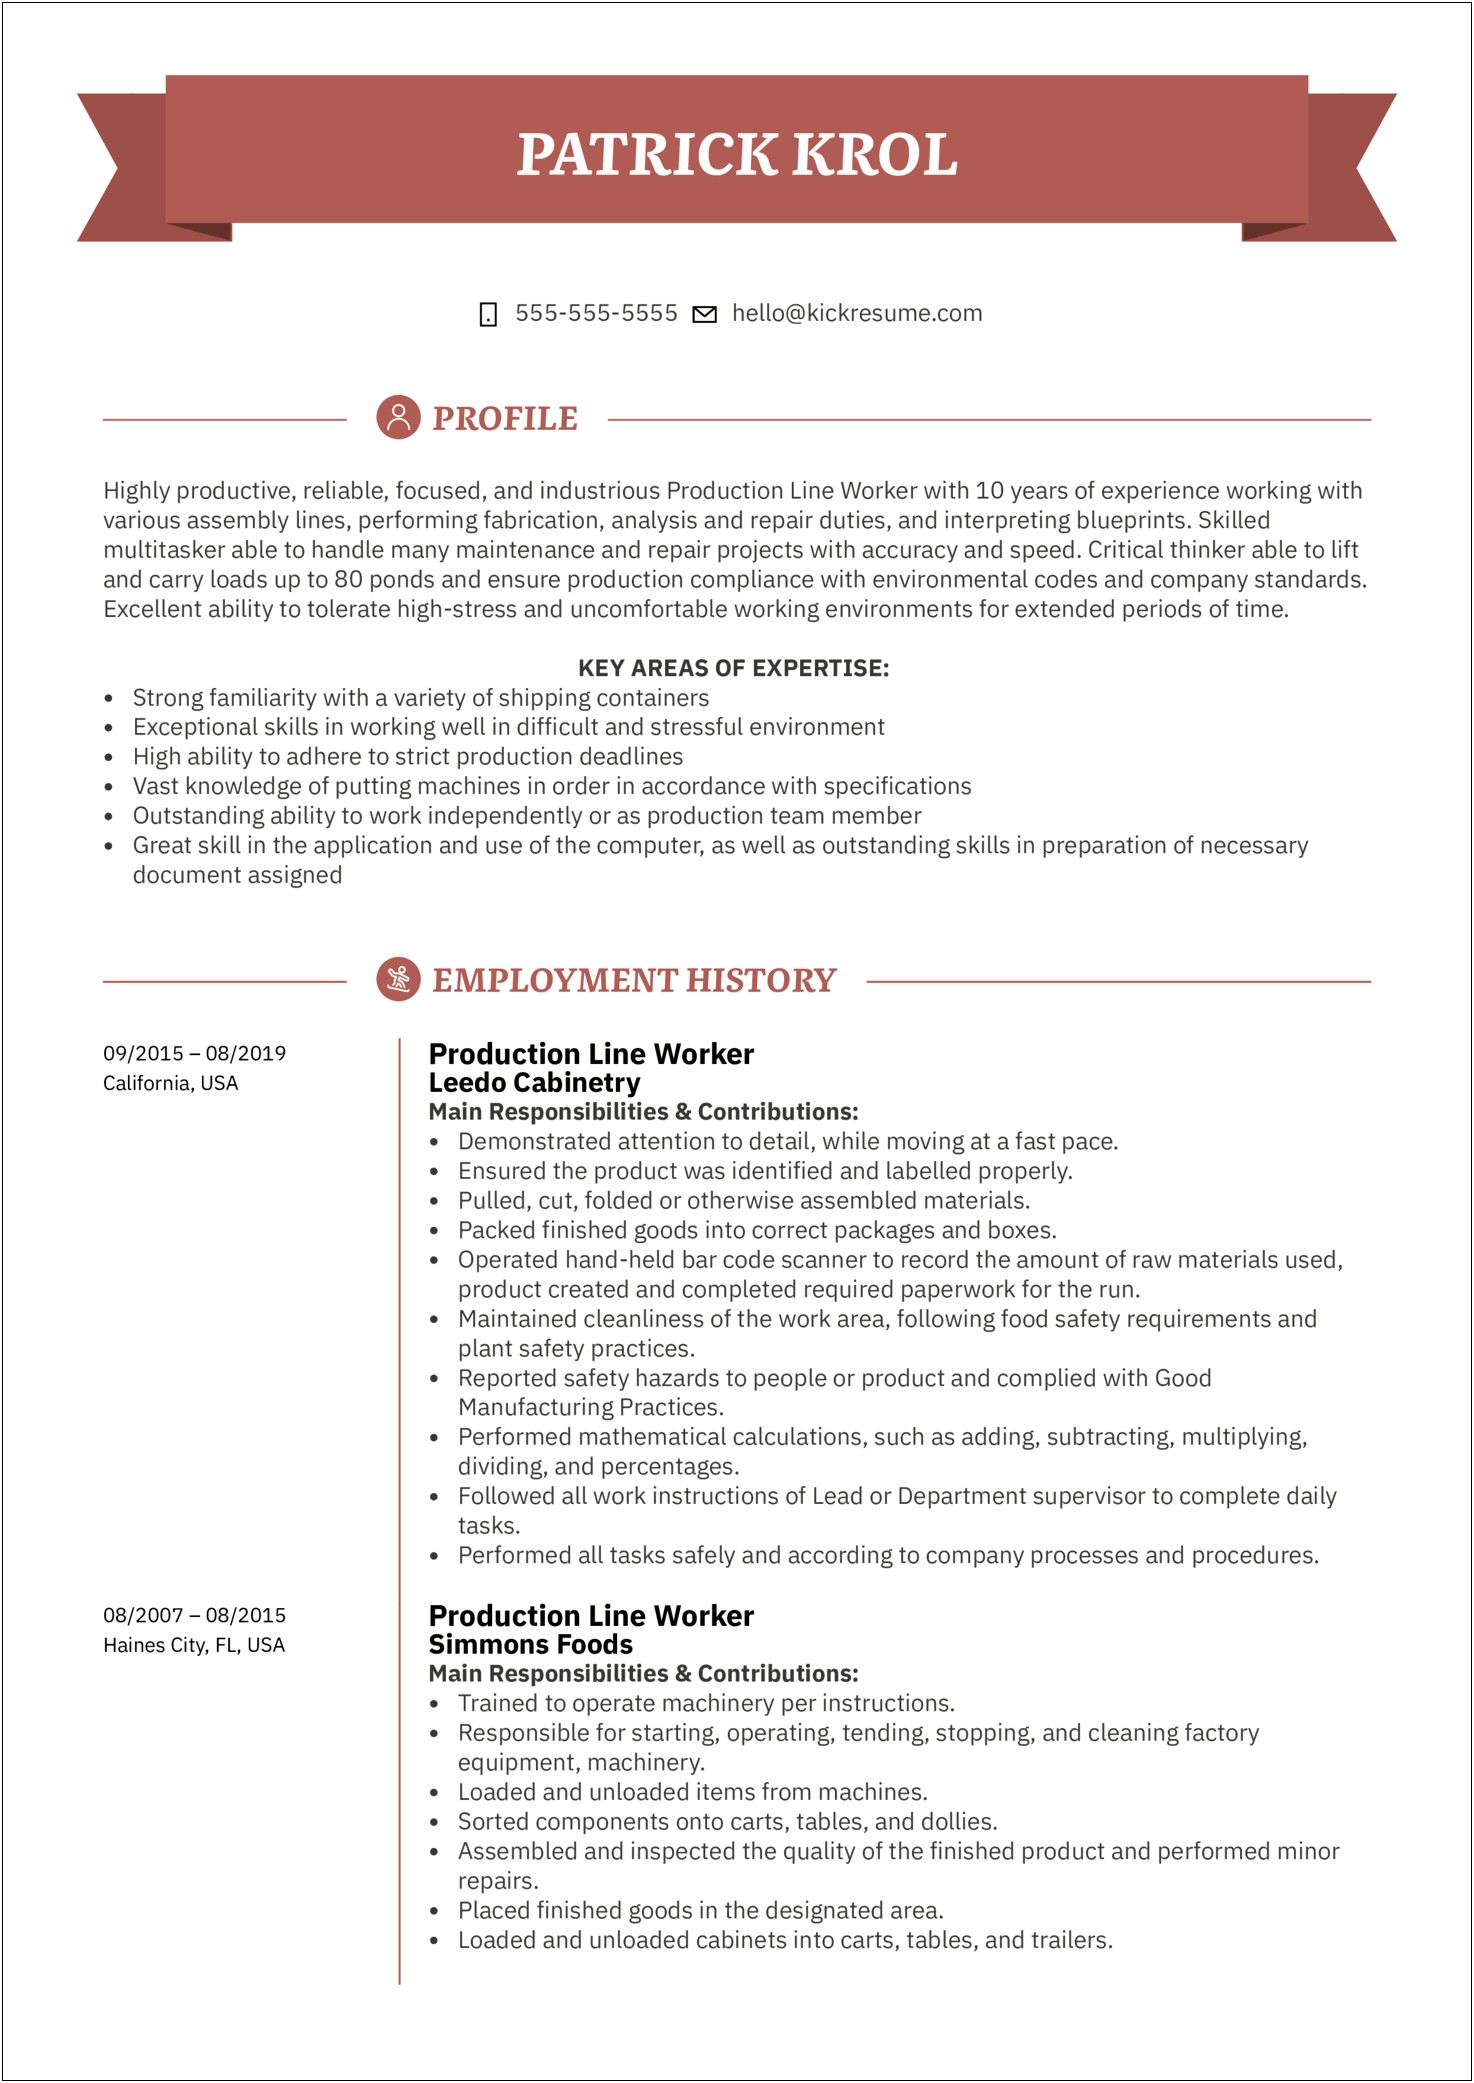 Resume Samples For Quality Control For Food Manufacturing